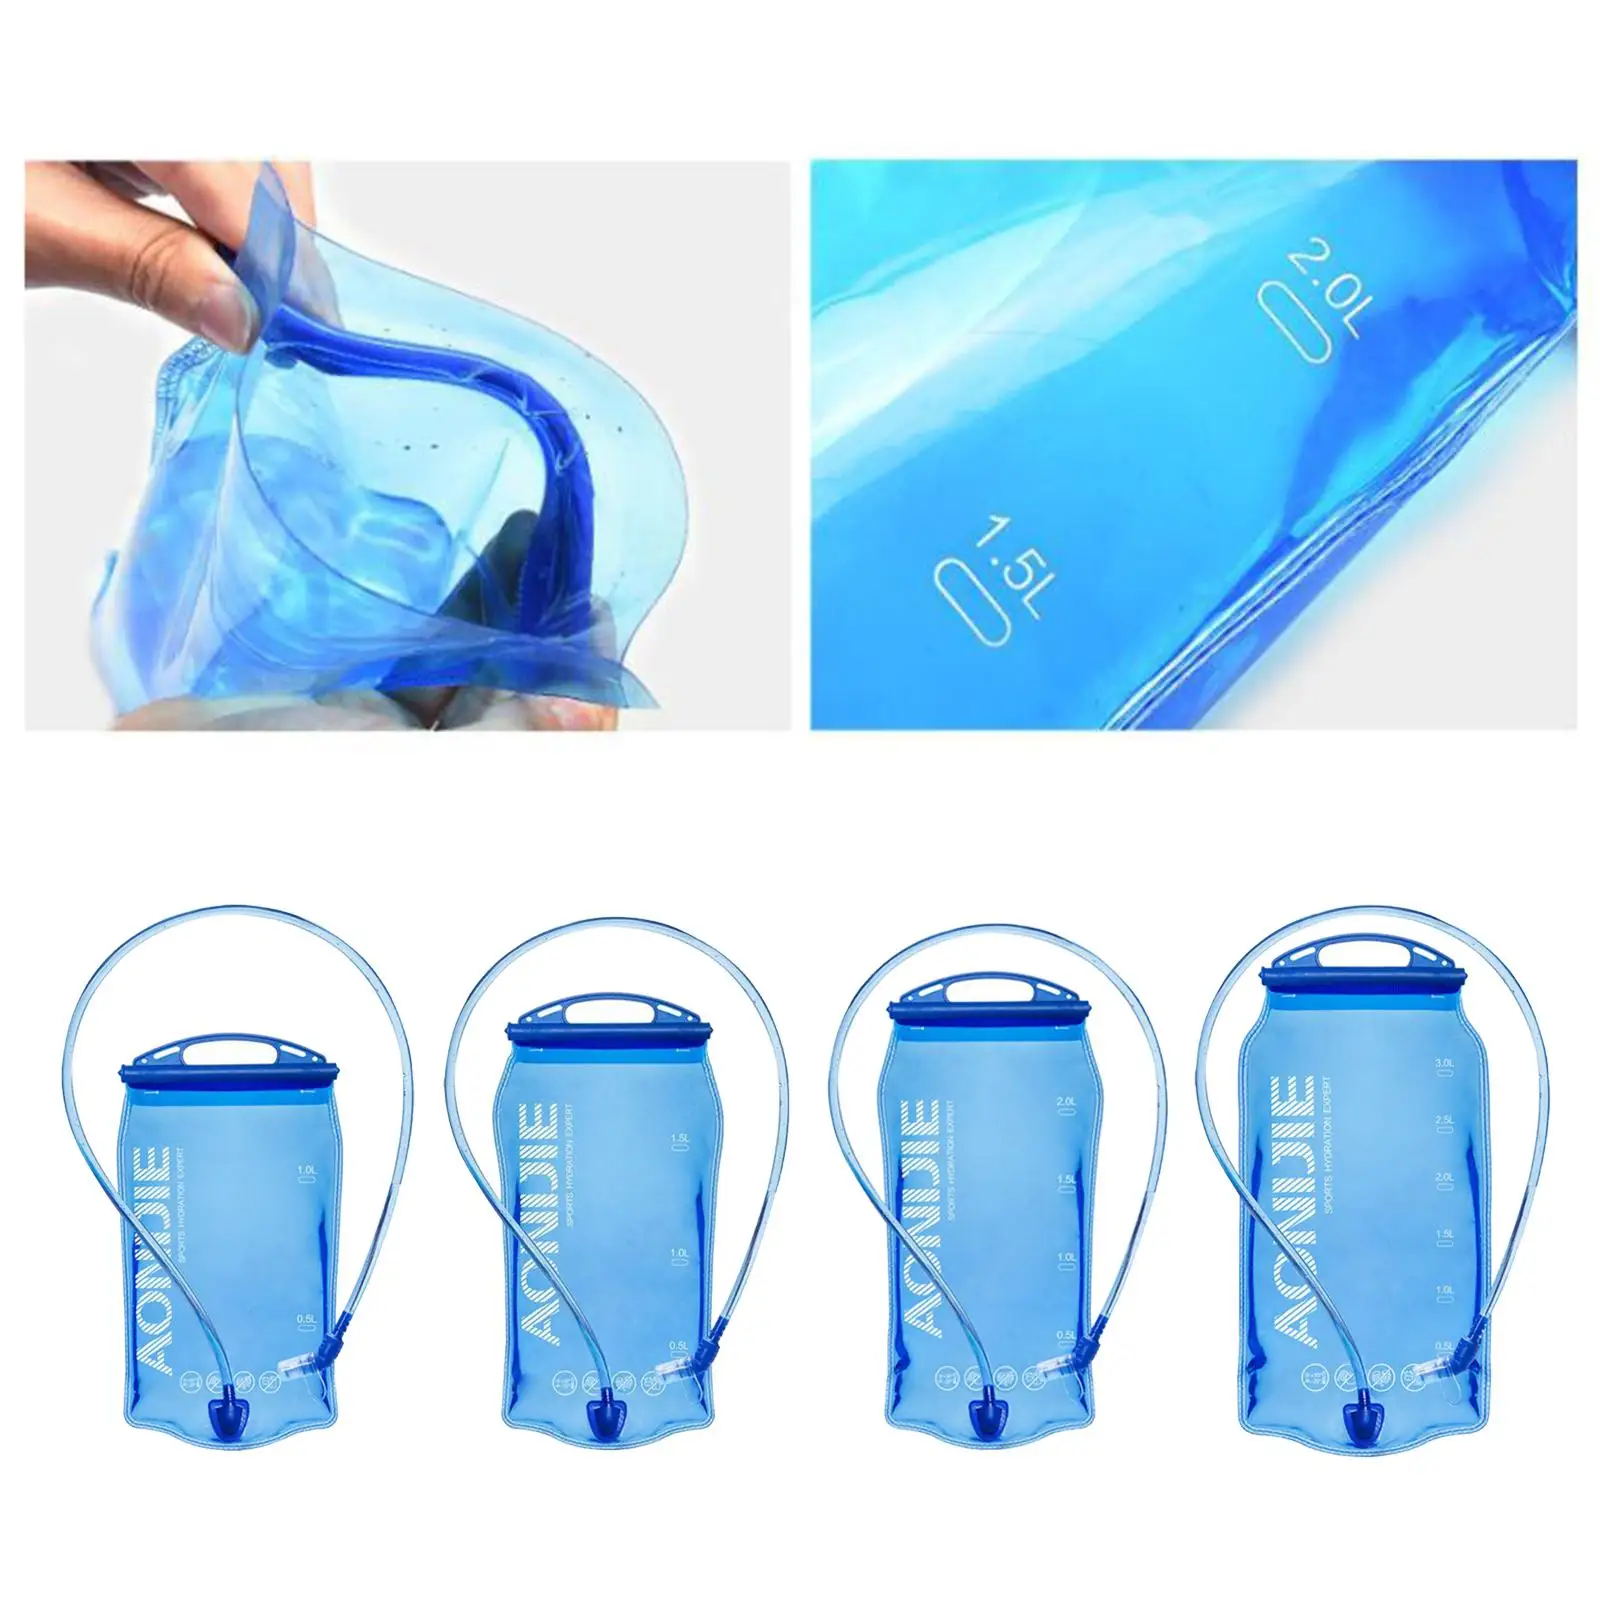 1--1.5-2-3L BPA   Bladder Water Reservoir Storage Bag with Scale for Bicycling Hiking Camping Backpack  Sports